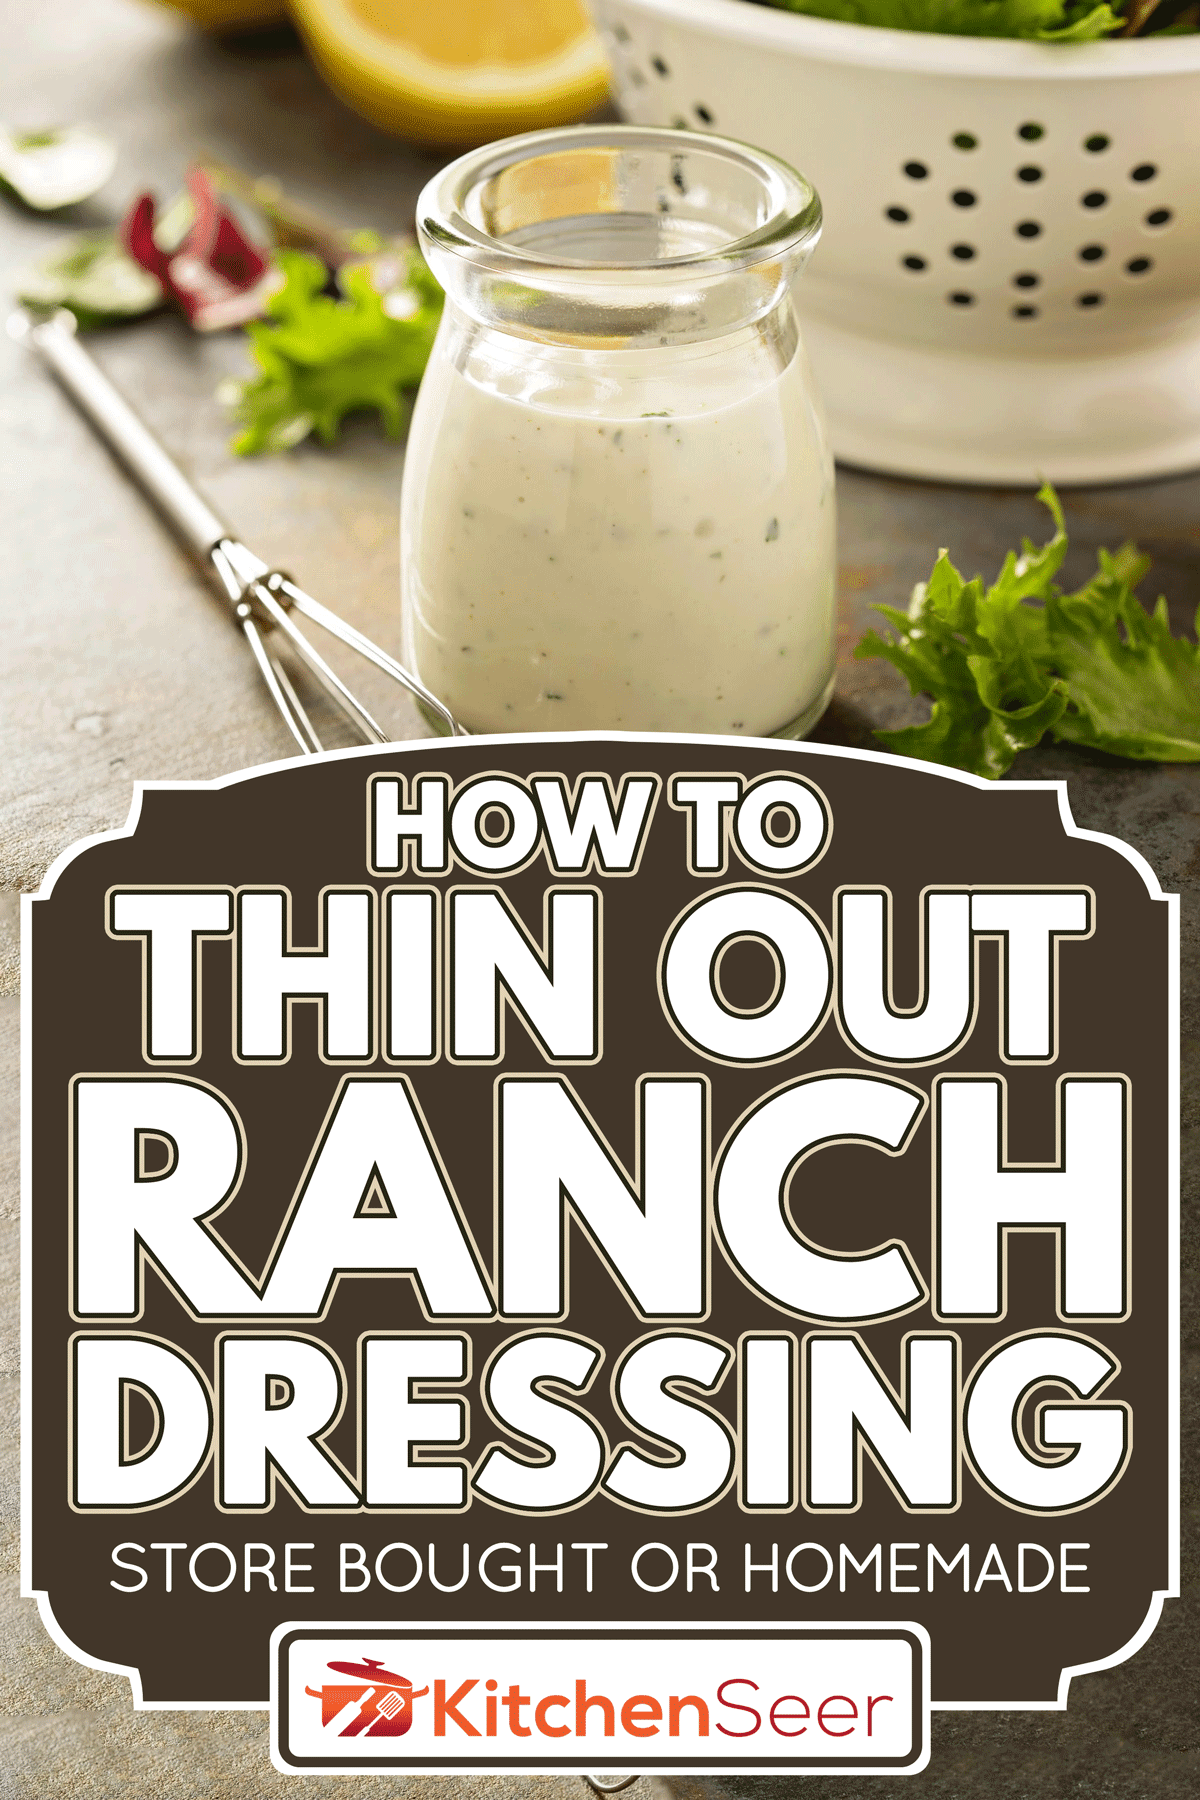 Homemade lemon ranch dressing in a small jar with fresh greens, How To Thin Out Ranch Dressing [Store Bought Or Homemade]